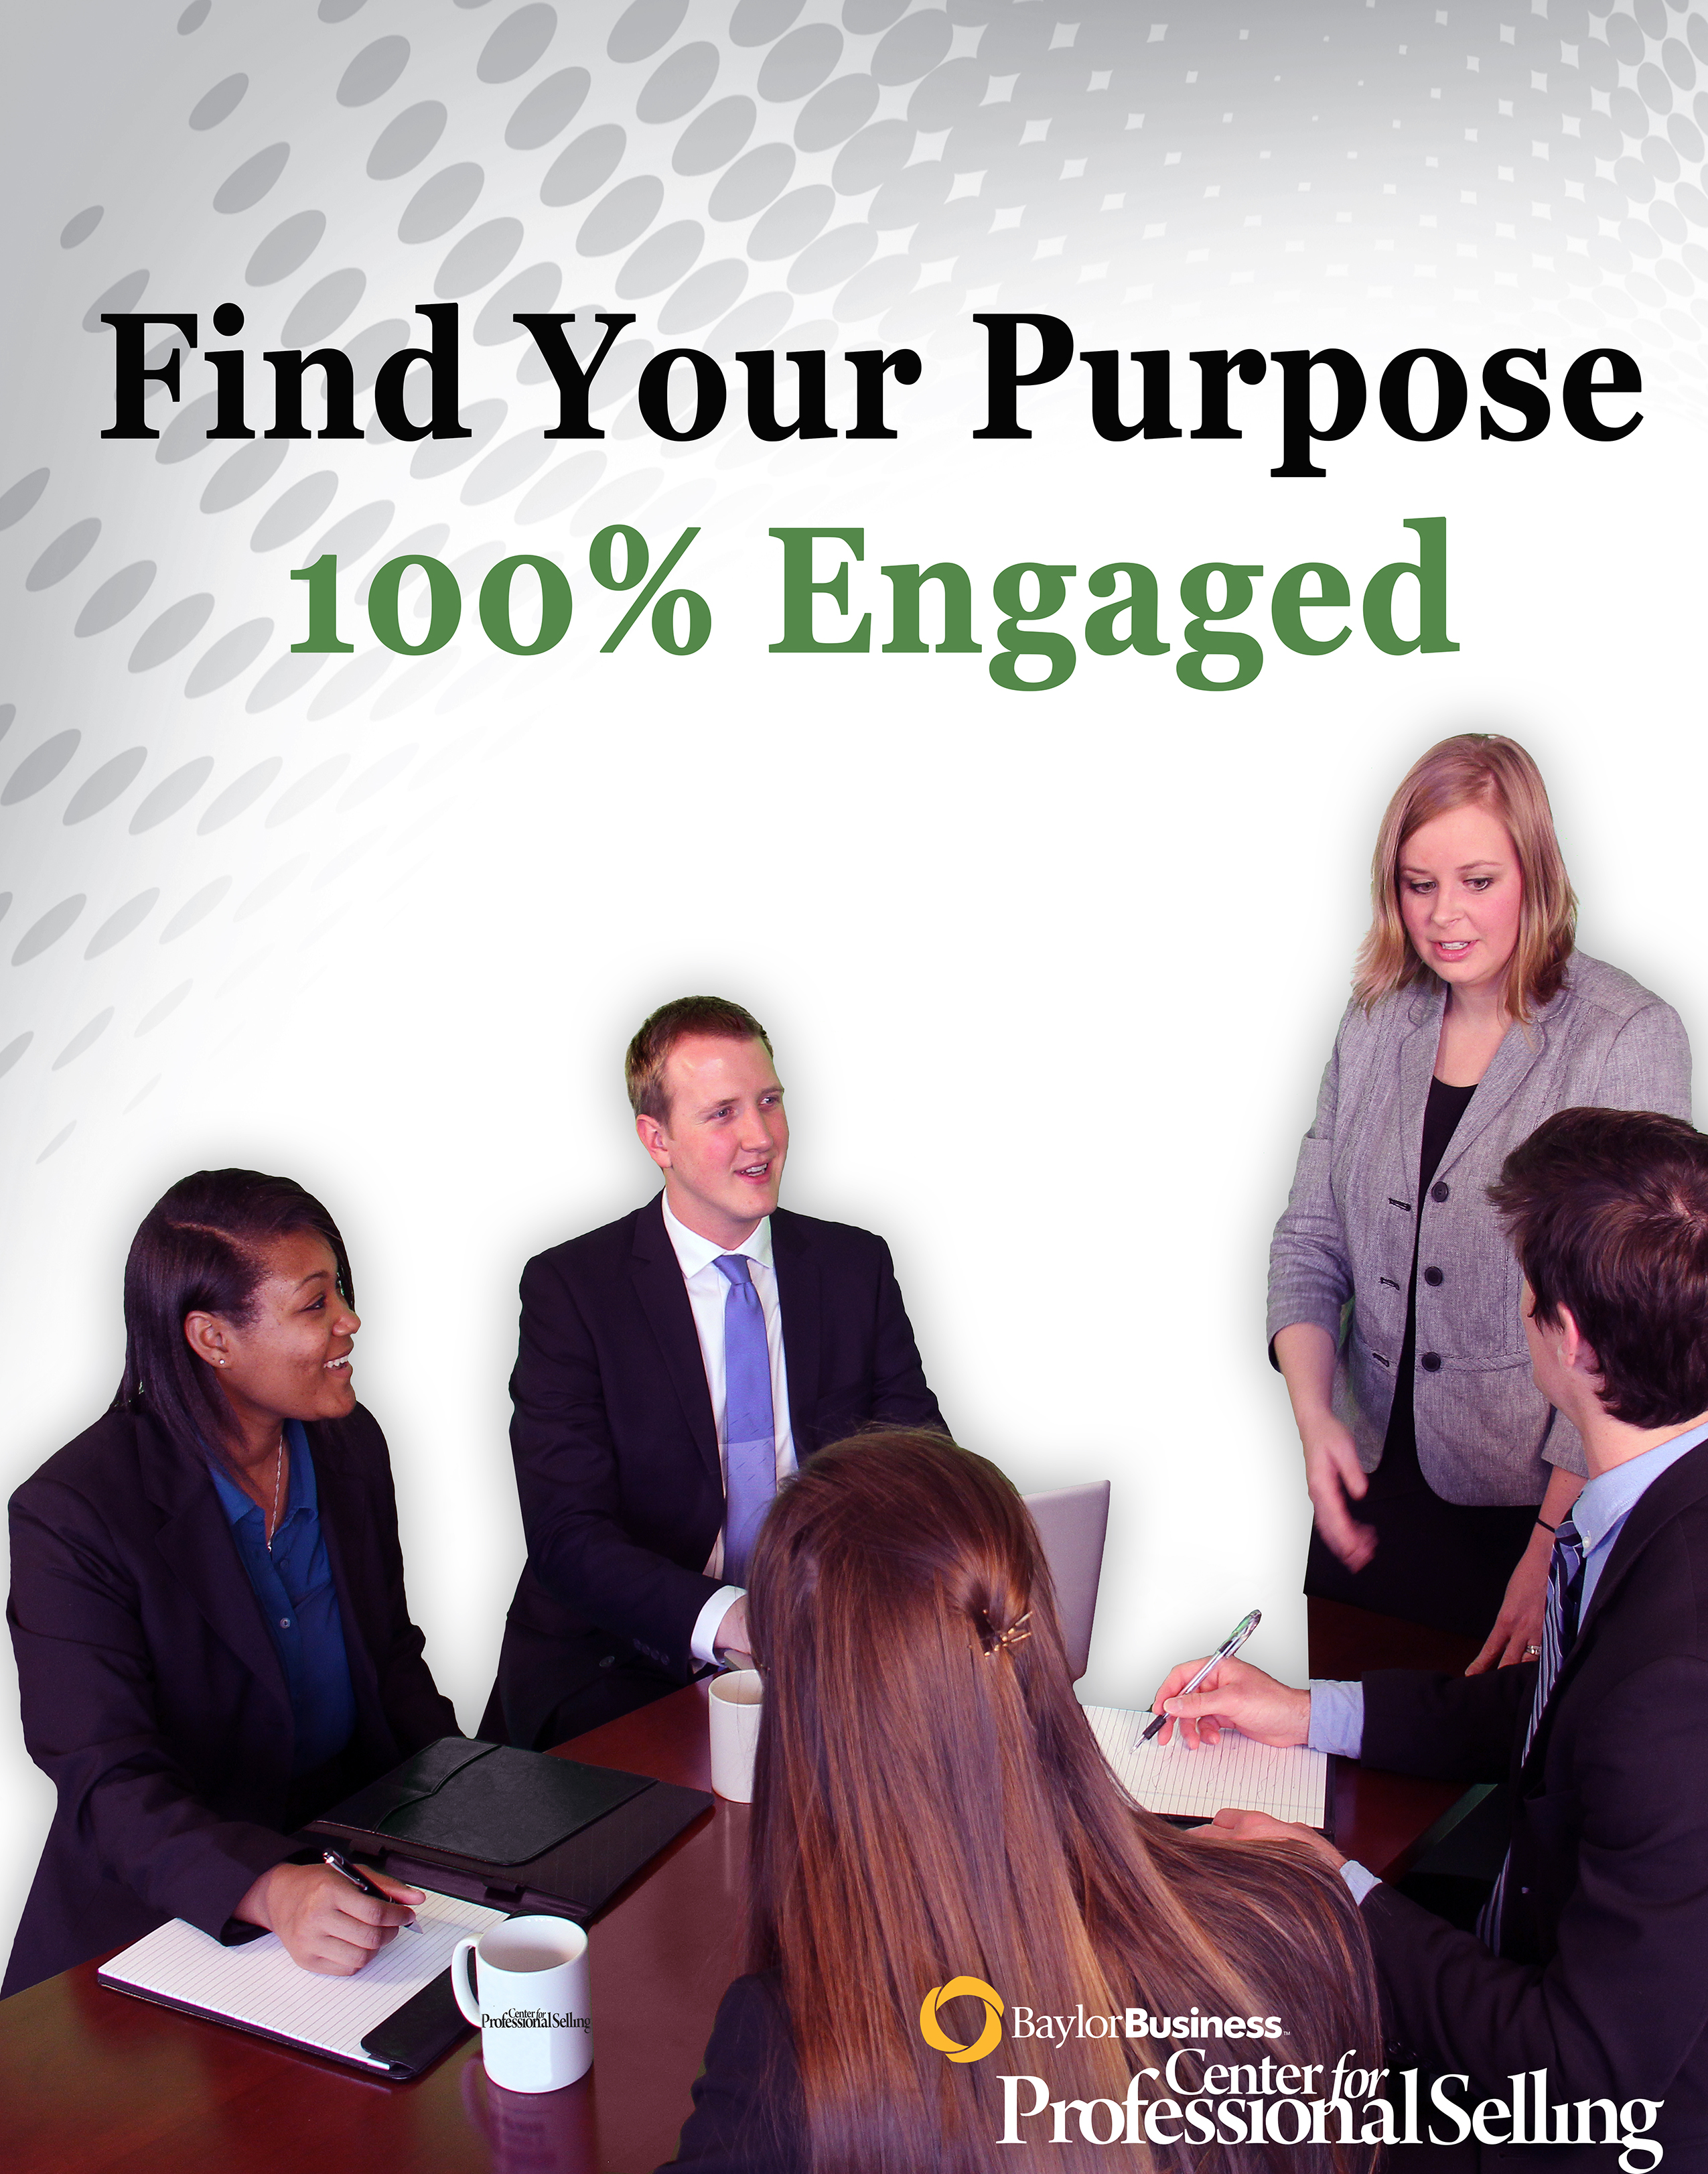 Find Your Purpose - 100% Engaged Ad 2